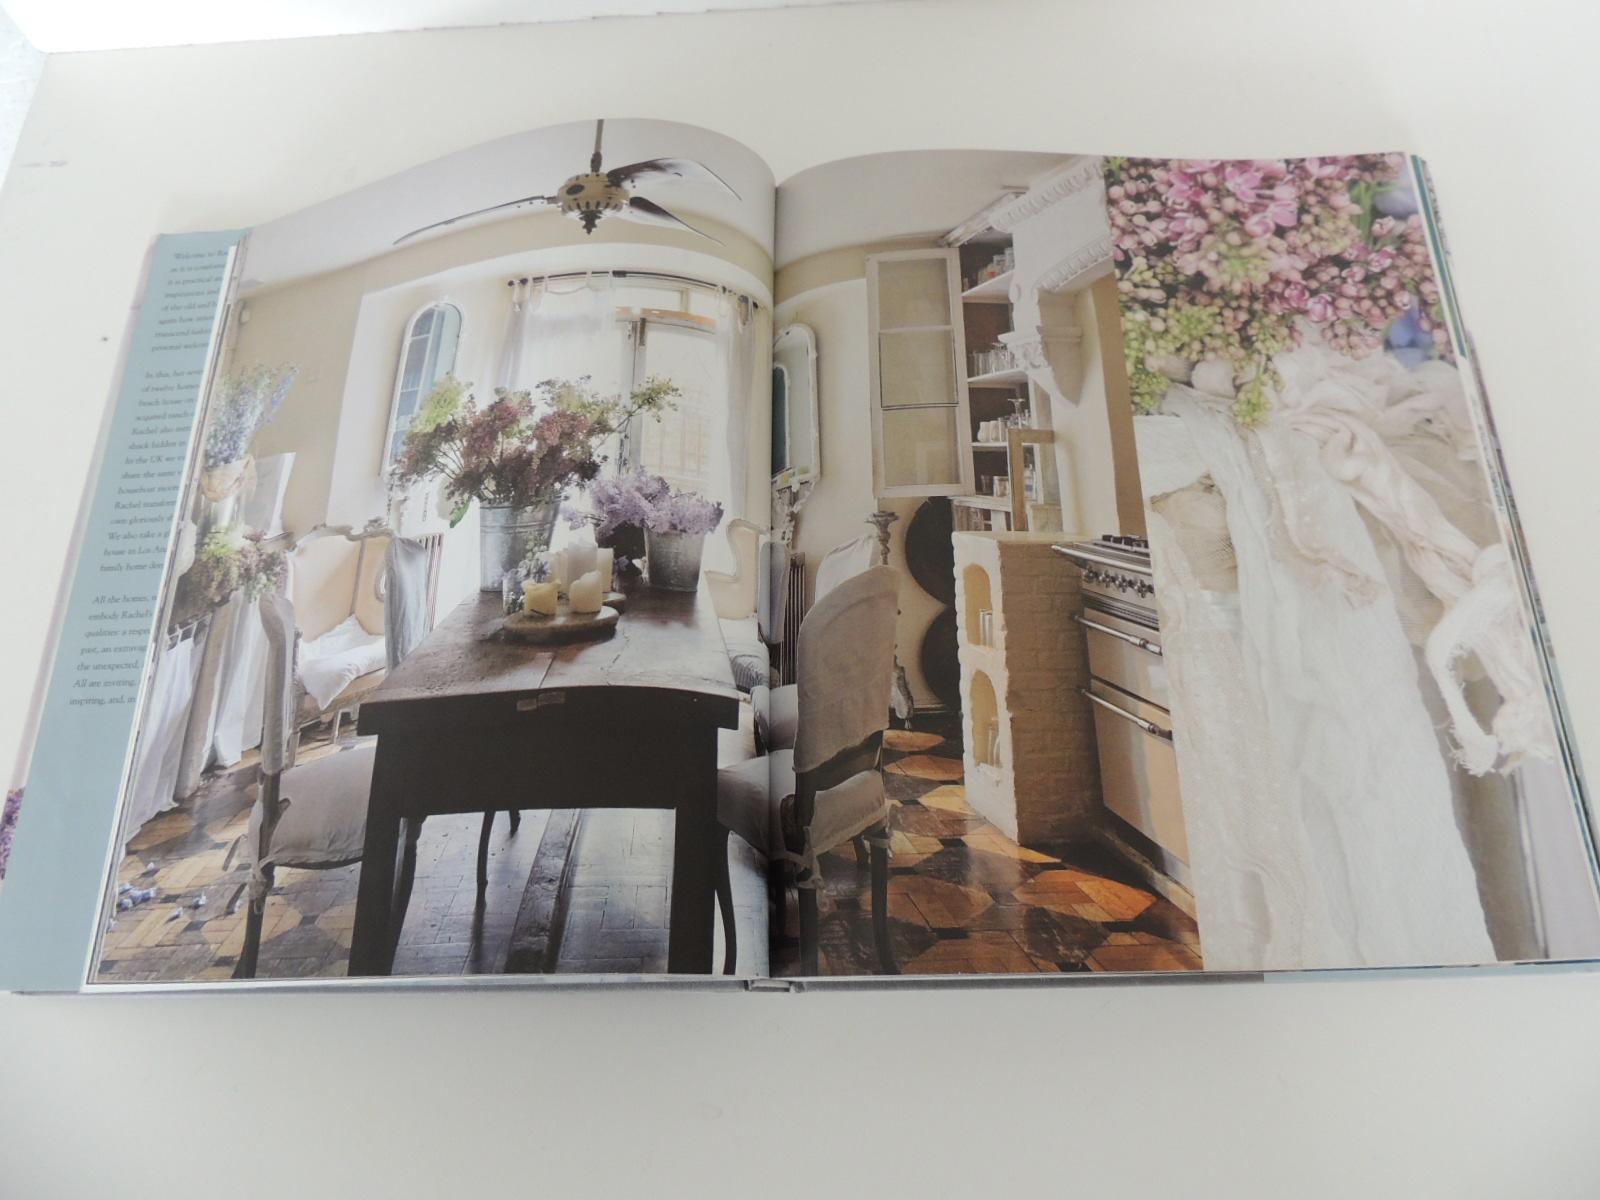 Coffee table book:
Rachel Ashwell Shabby Chic Inspirations Hardcover – October 12, 2011
by Rachel Ashwell (Author) 192 pages.
In this book, Rachel shares her inspirations and her humor, celebrates the charm of the old and battered, and demonstrates